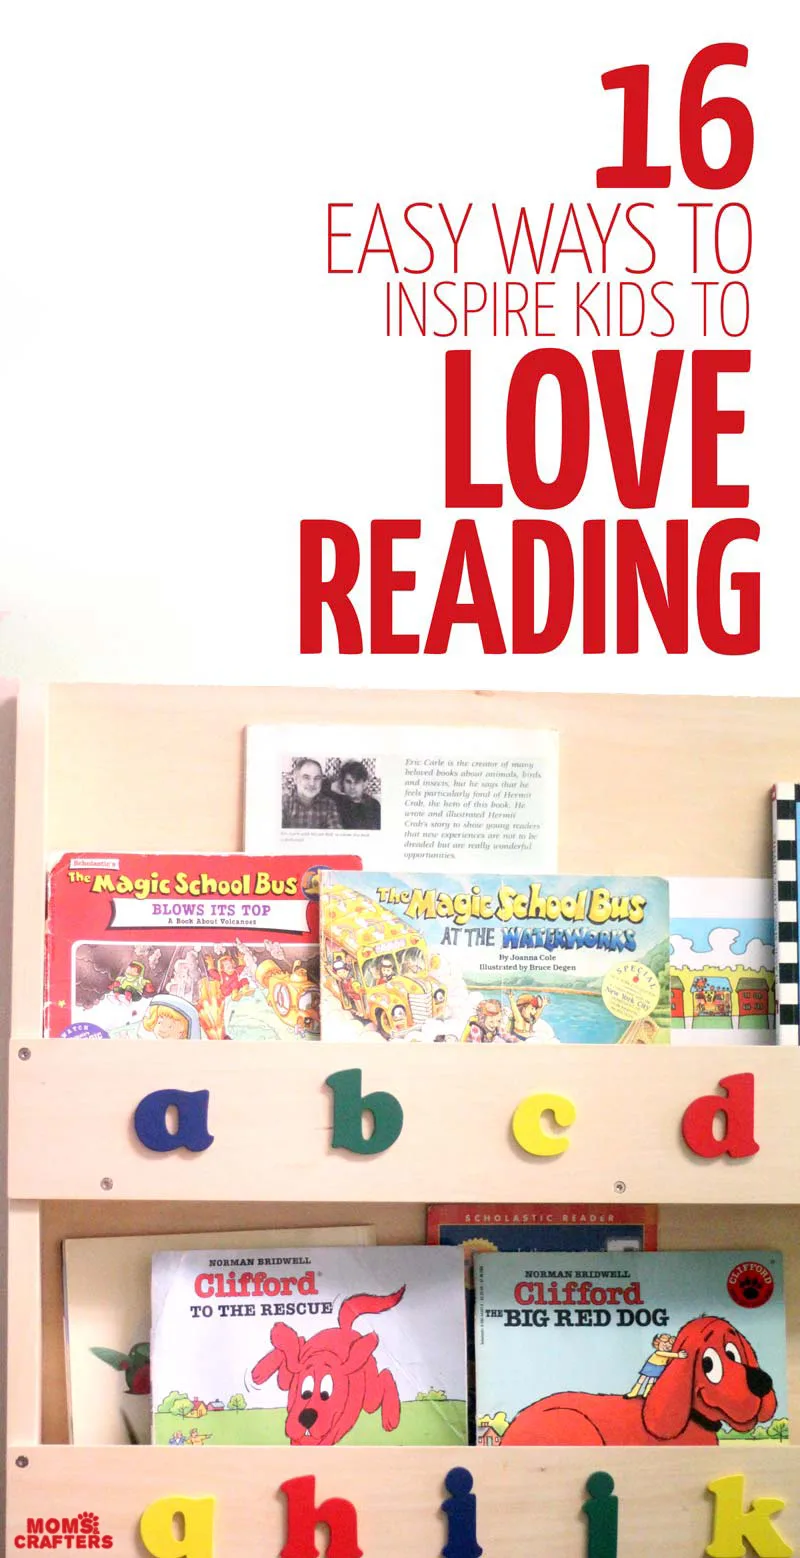 Want to inspire your kids to love reading? These 16 easy ideas are perfect for getting kids to love books- great tips for teaching and parenting kindergarden and preschool kids with strong literacy skills!